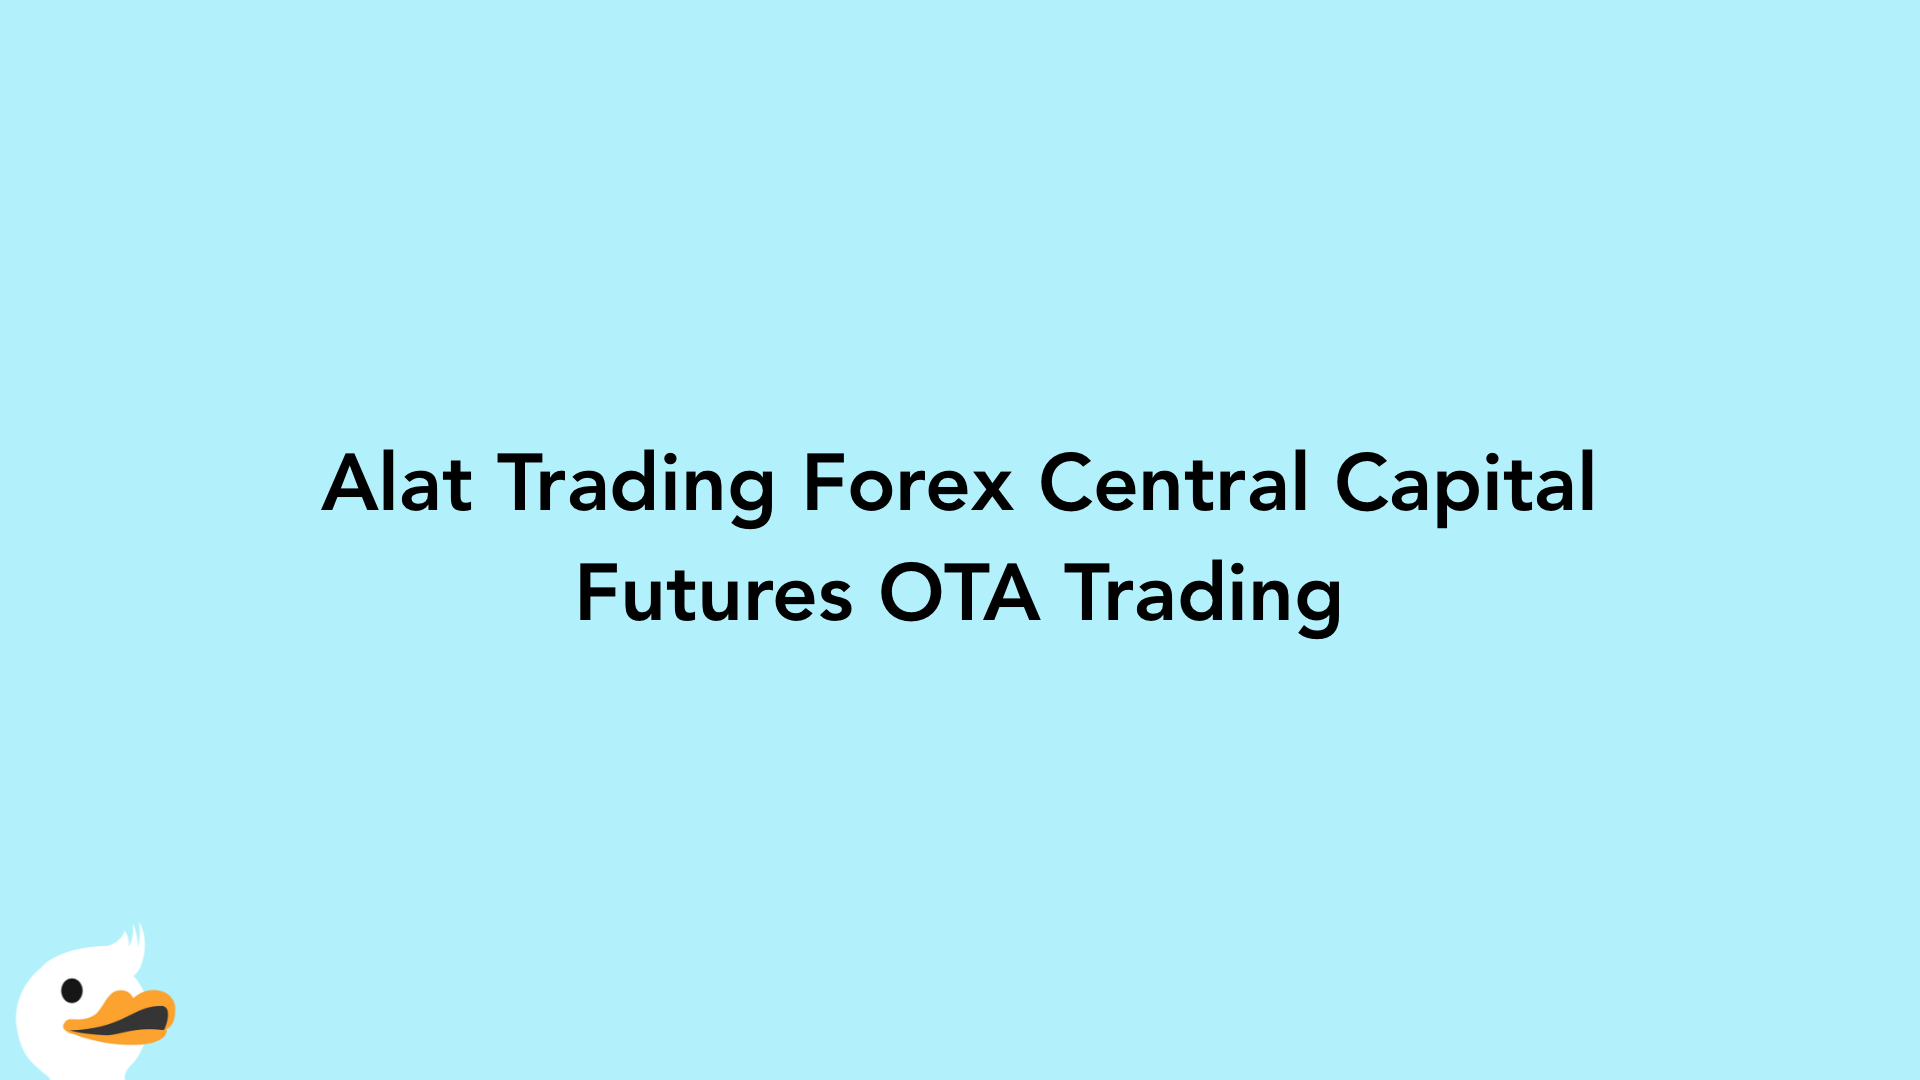 Alat Trading Forex Central Capital Futures OTA Trading